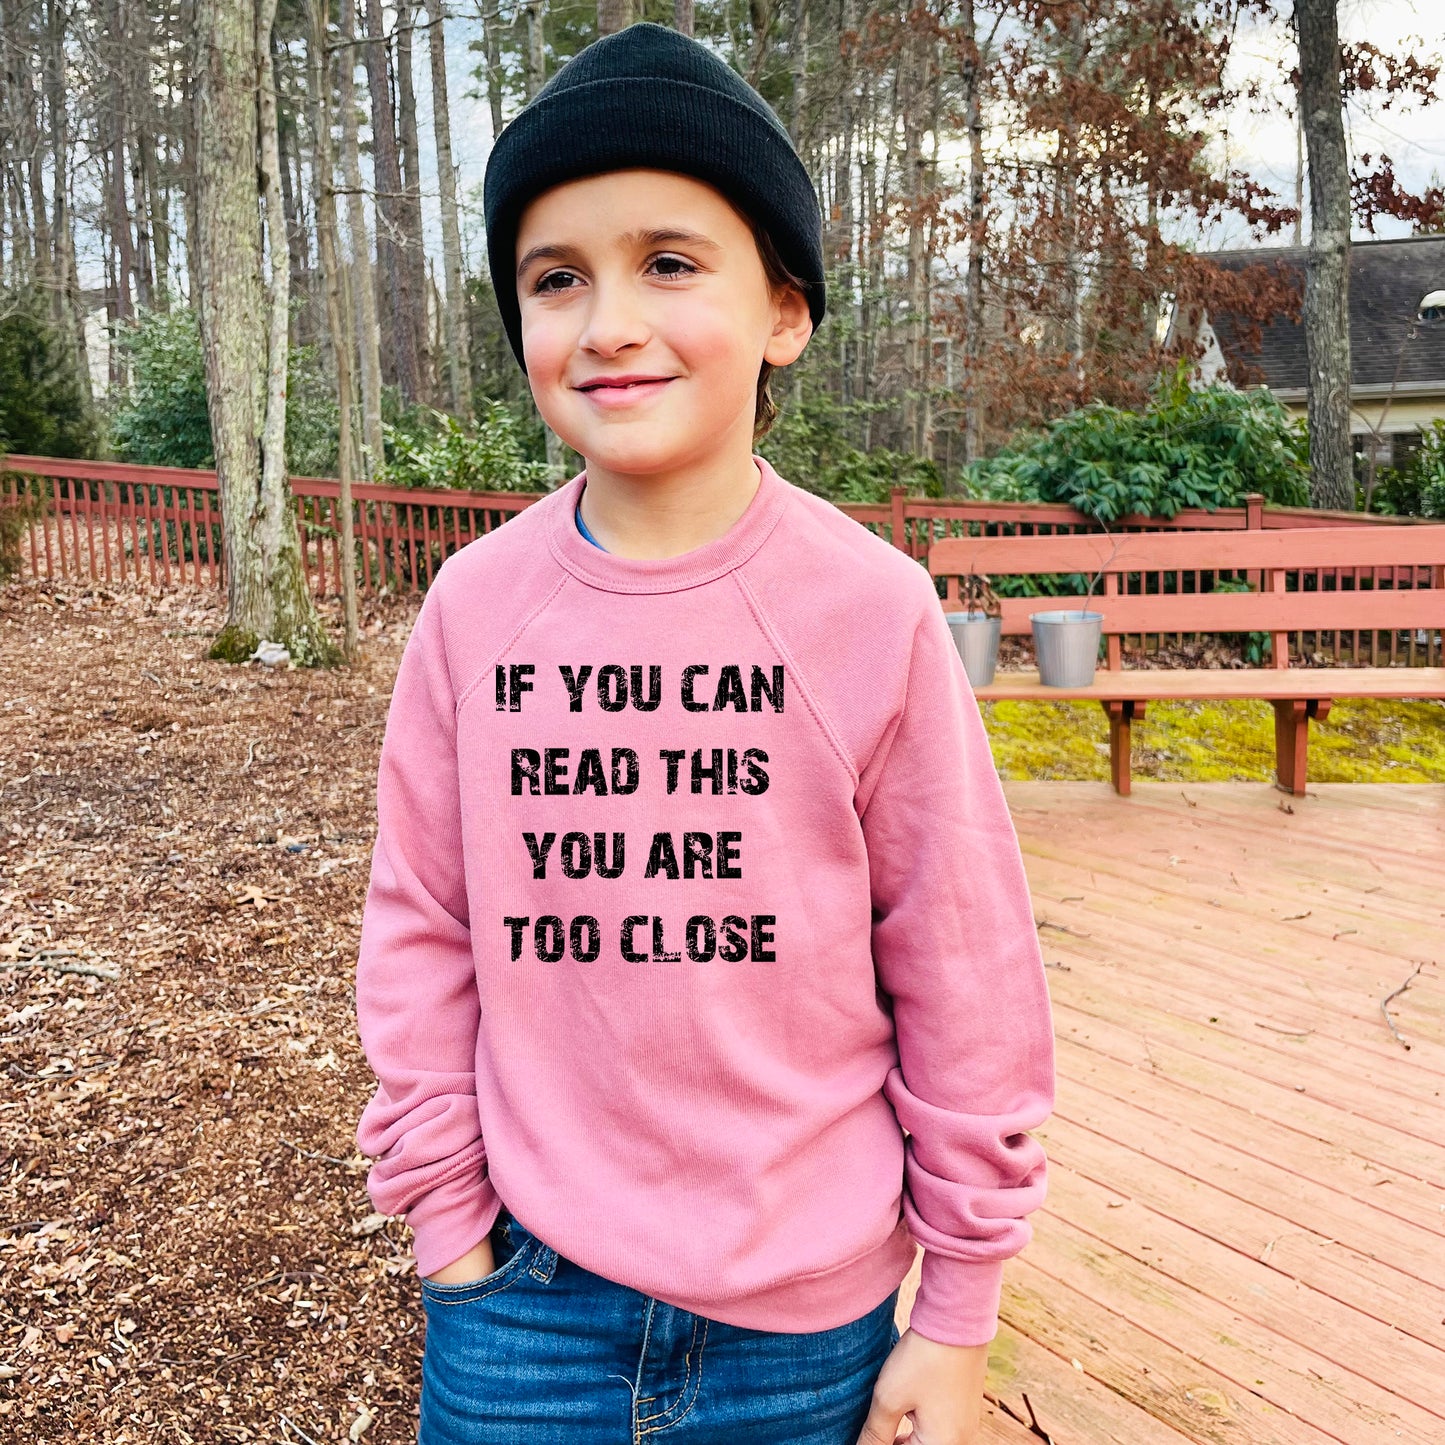 If You Can Read This You Are Too Close - Kid's Sweatshirt - Heather Gray or Mauve